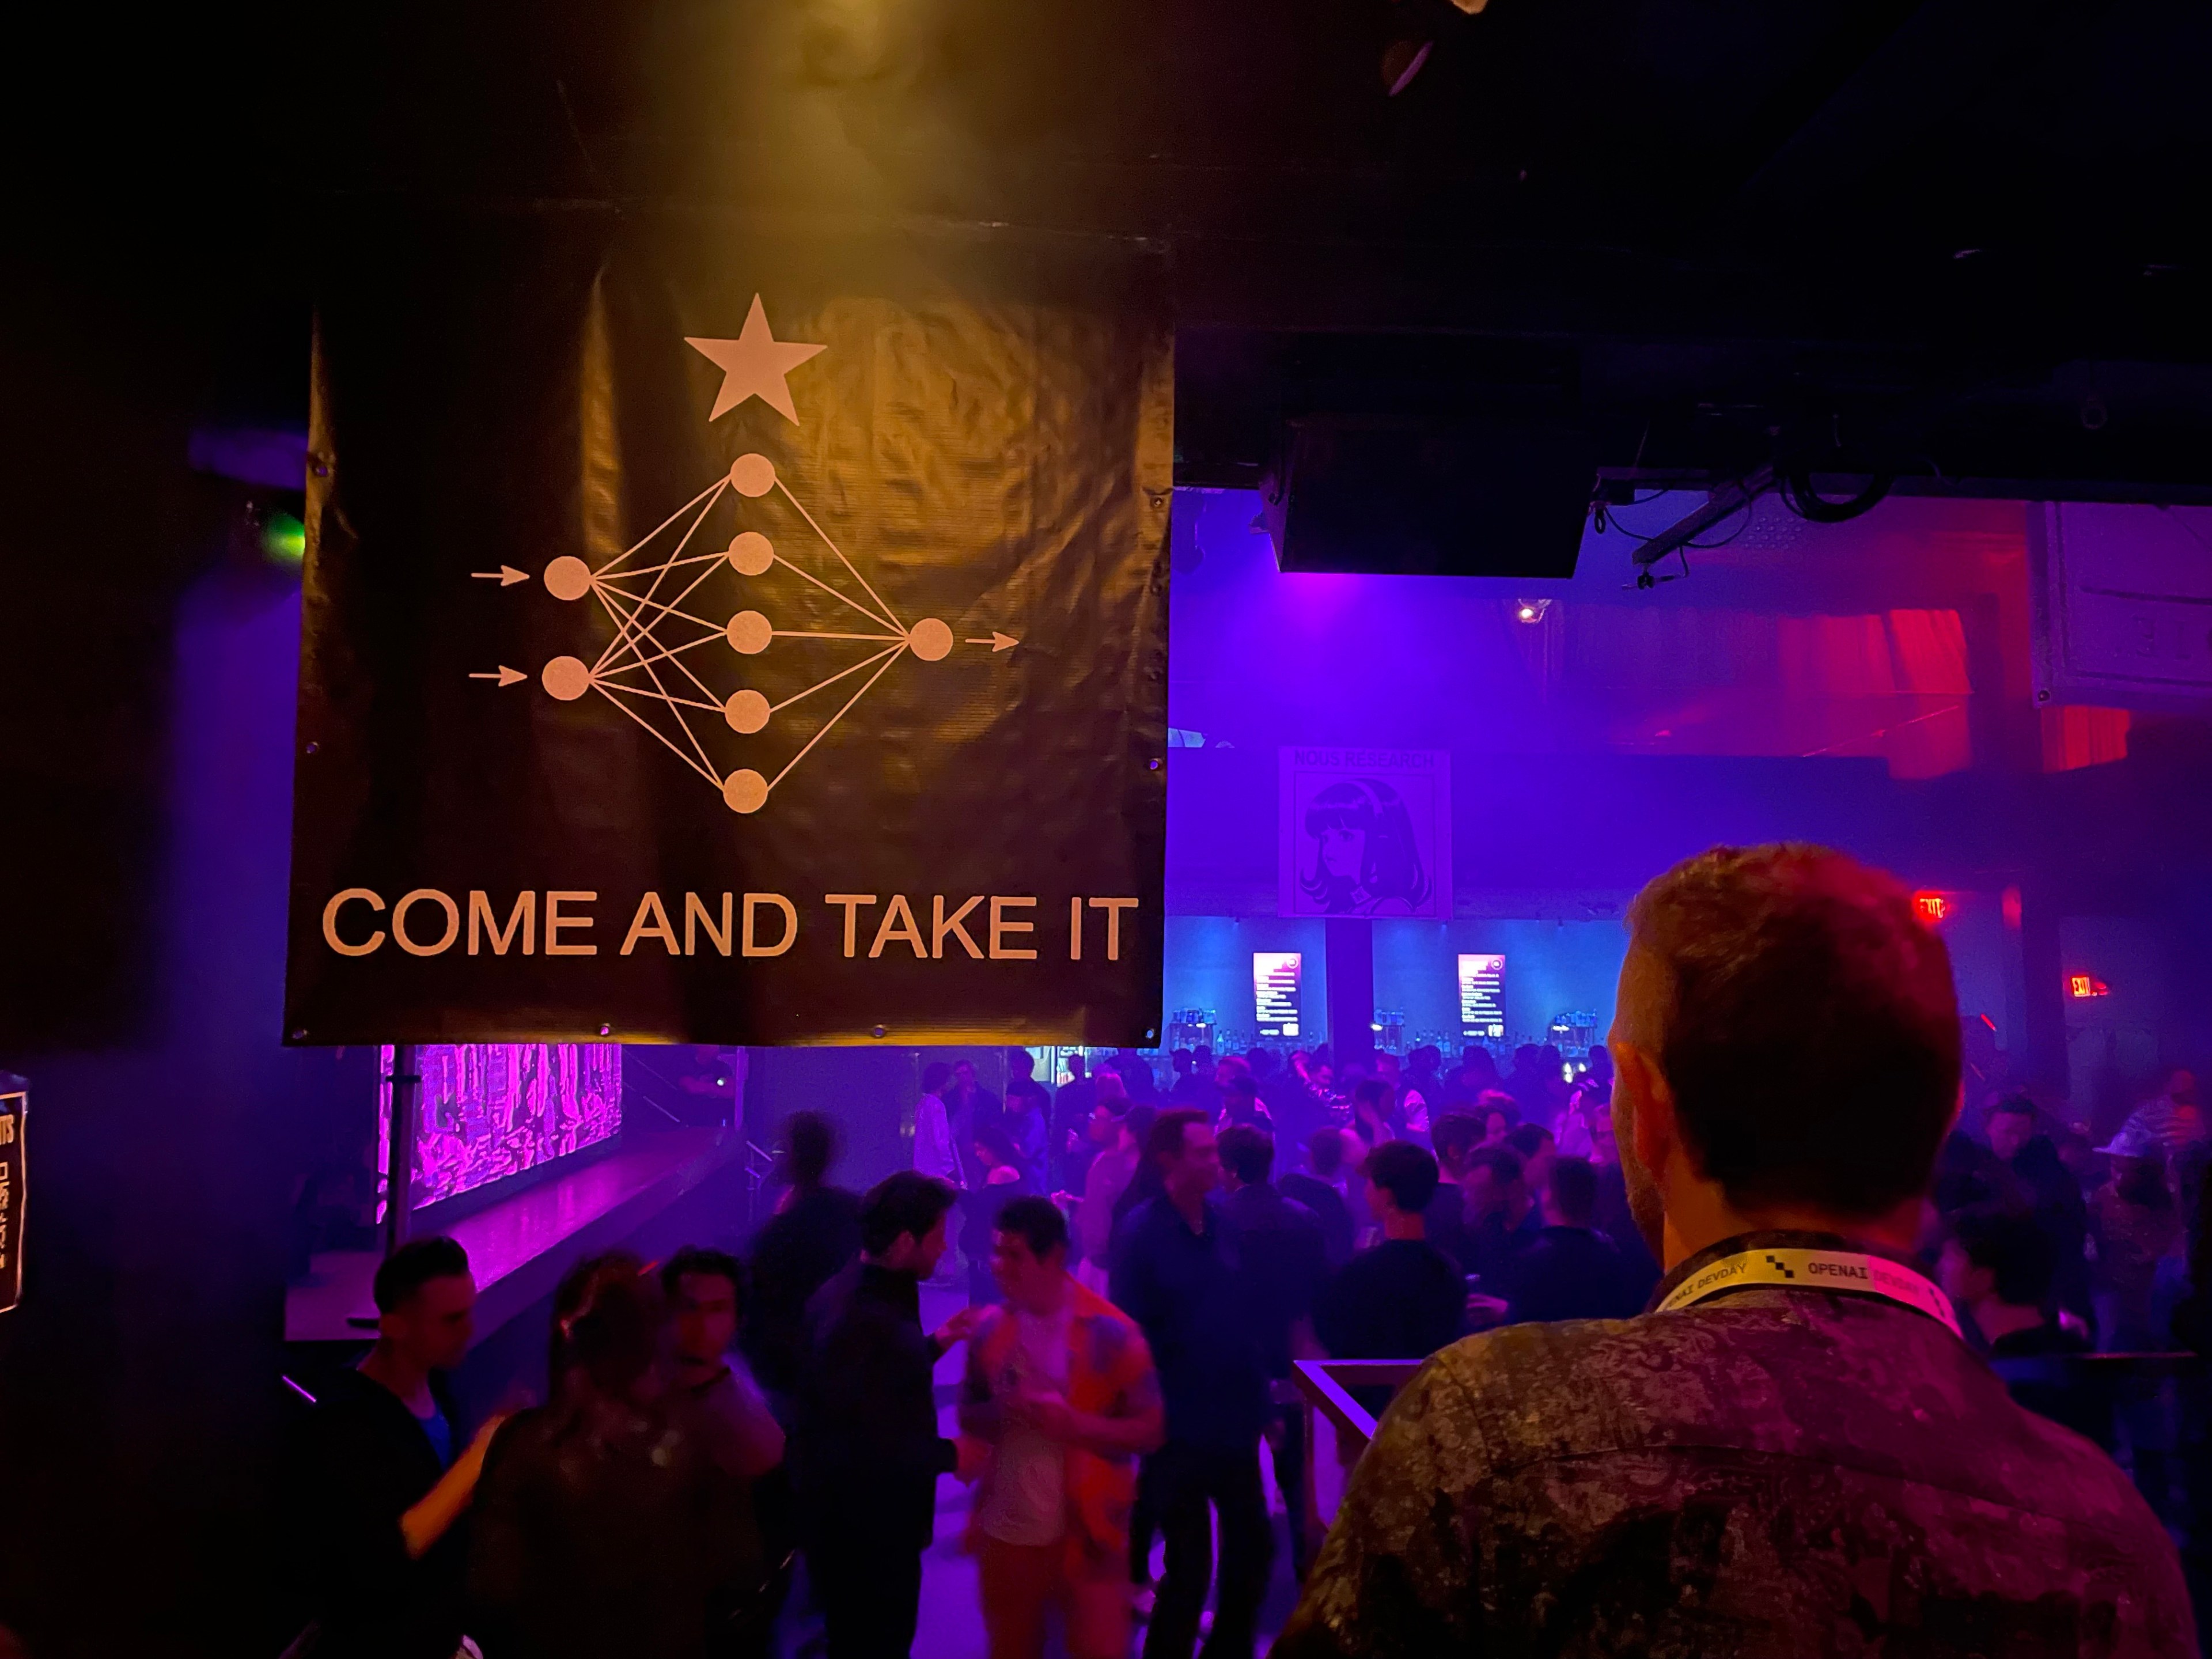 A person stands in the foreground to the right of a black poster reading &quot;come and take it&quot; next to an image with a series of dots connected with lines forming the web—a depiction of a &quot;neural net&quot; used by AI algorithms. Behind the poster is a crowd of people near a stage at a nightclub bathed in blue and purple light.